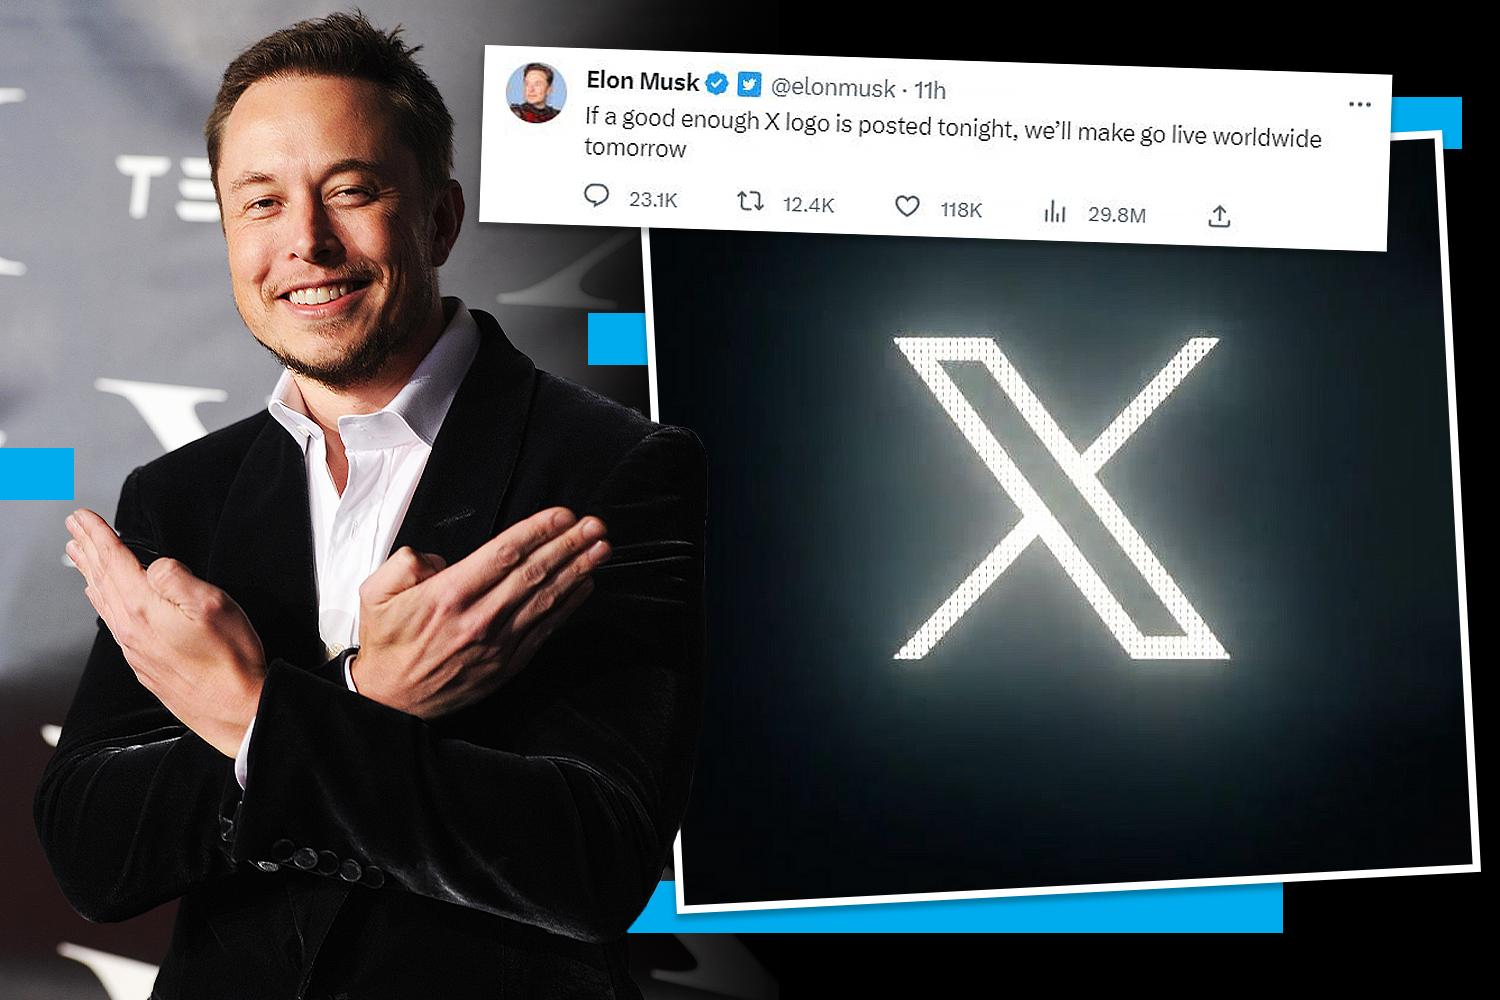 The Time Has Come Elon Musk Rebrands Twitter to X